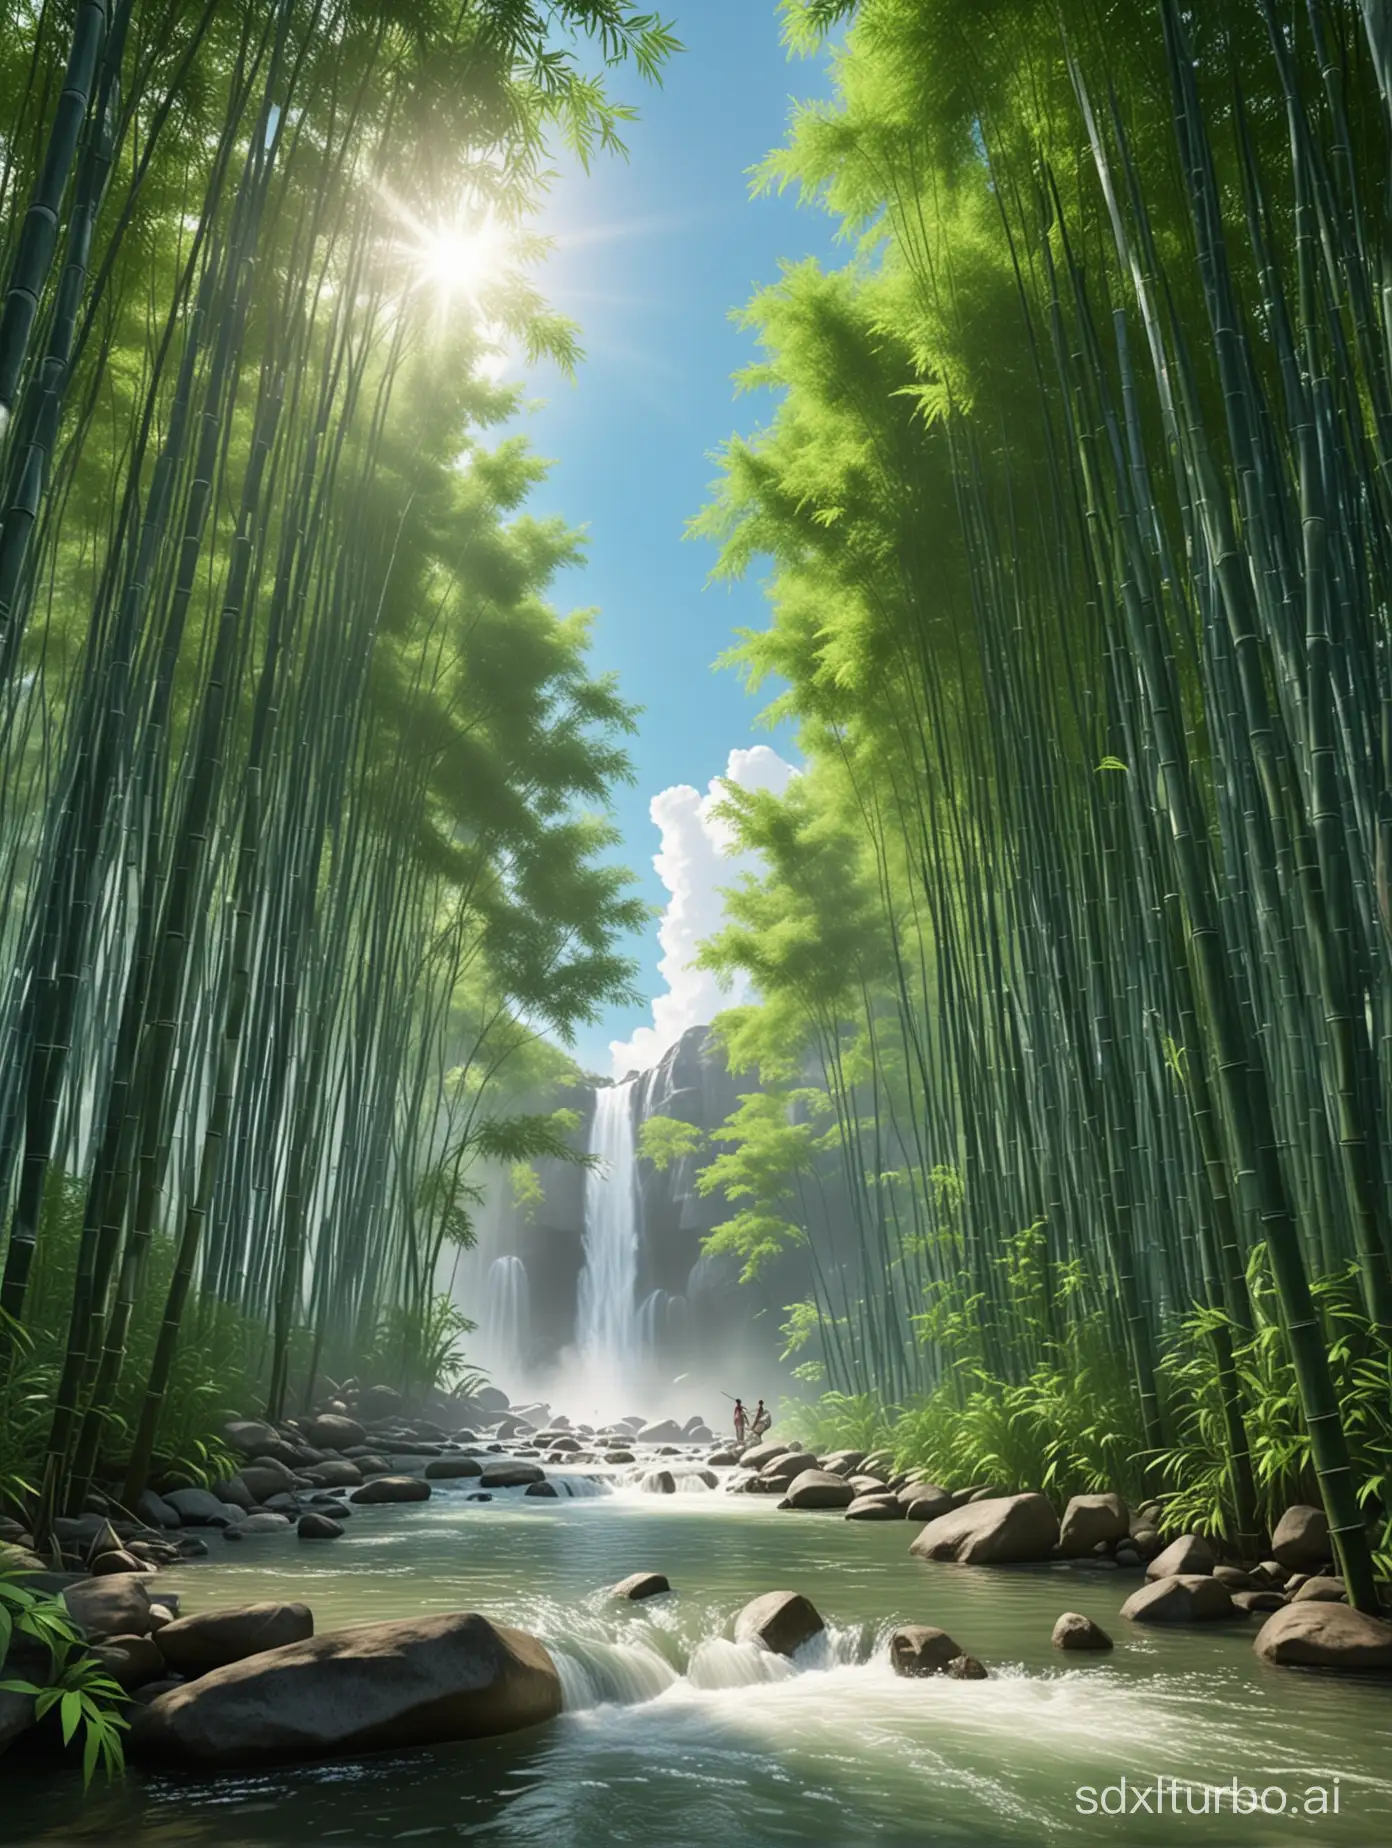 Blue sky and white clouds, (bamboo forest), lake, waterfall person. Soft bamboo turns green, tree shade blocks the sun, waterfall flight, gushing spring water, highest quality to the highest, ultra-detailed, best shadow, 8k, official art